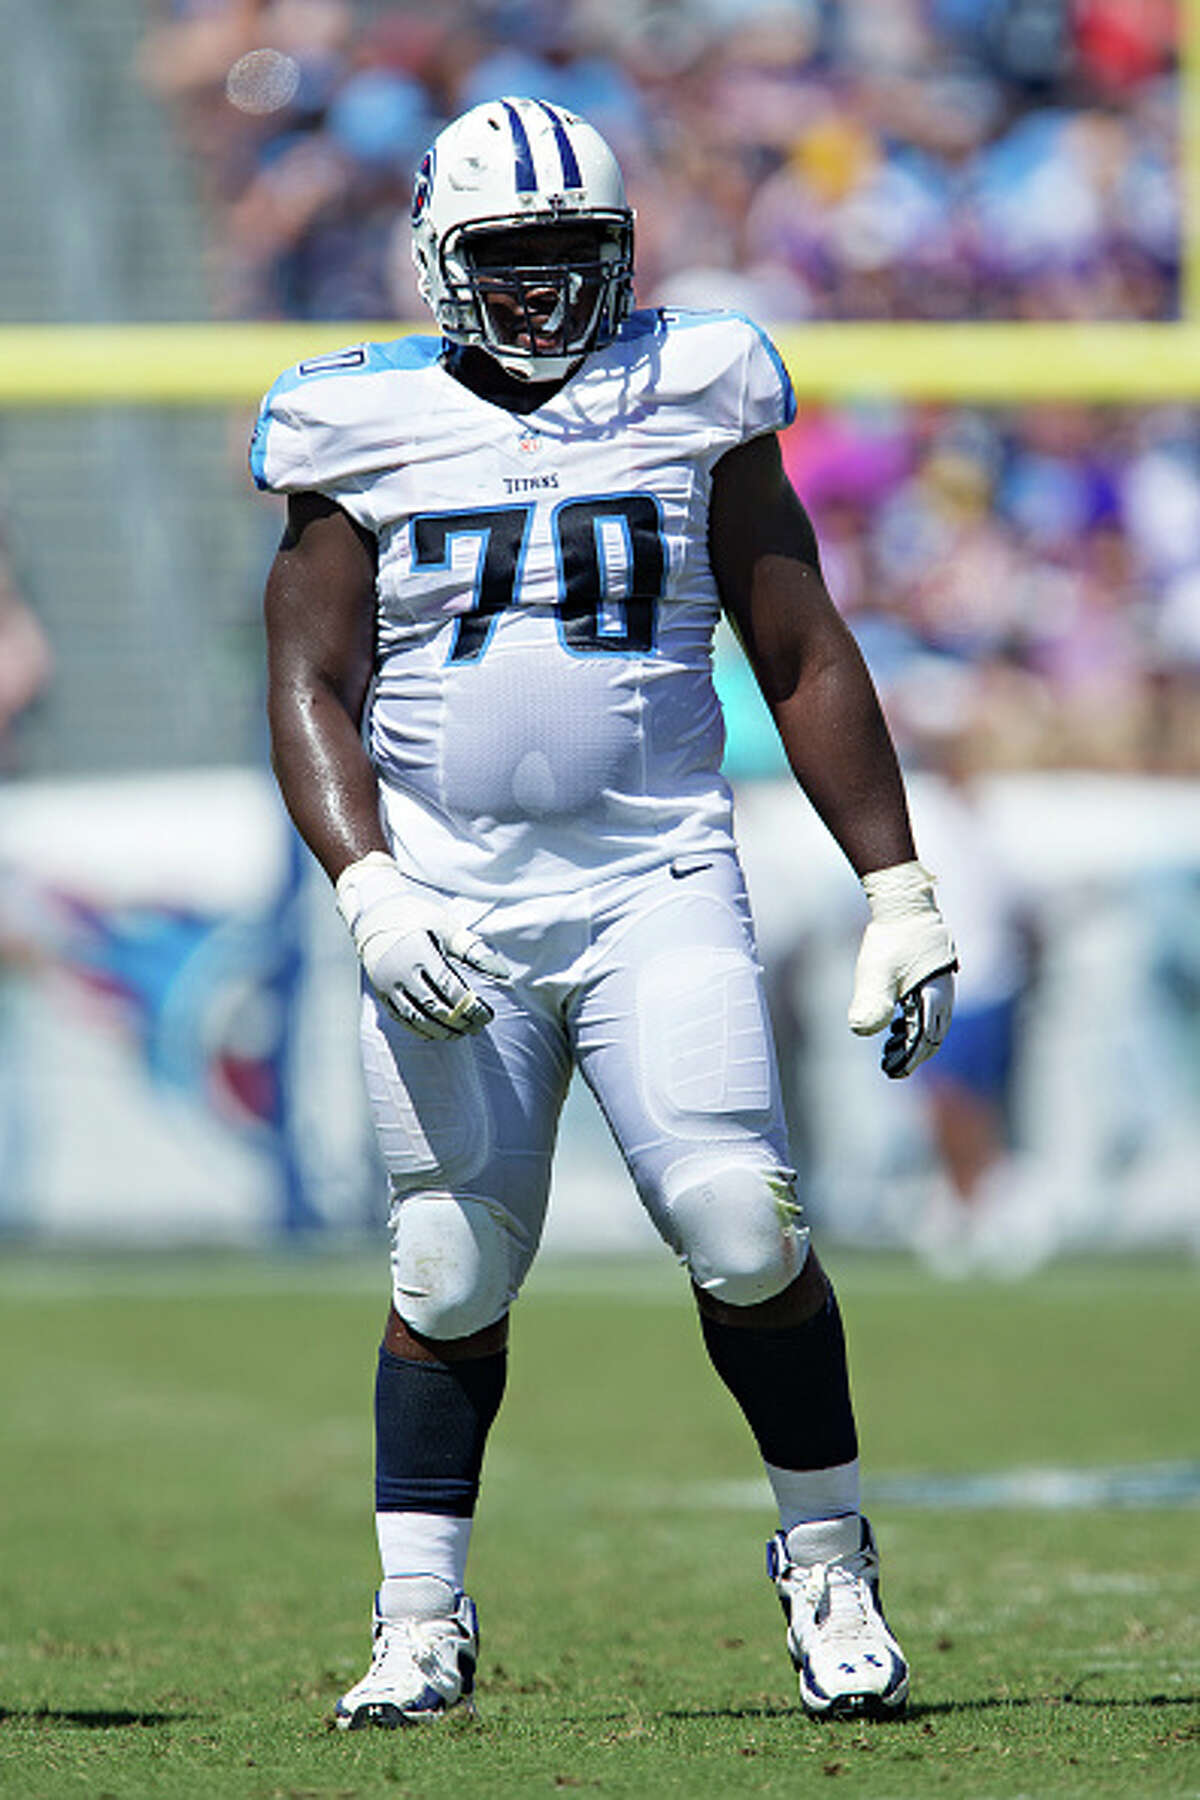 Veteran guard Chance Warmack, who the team signed to a one-year deal in free agency, has taken the voluntary opt-out for the 2020 season, a source confirmed to SeattlePI Monday.